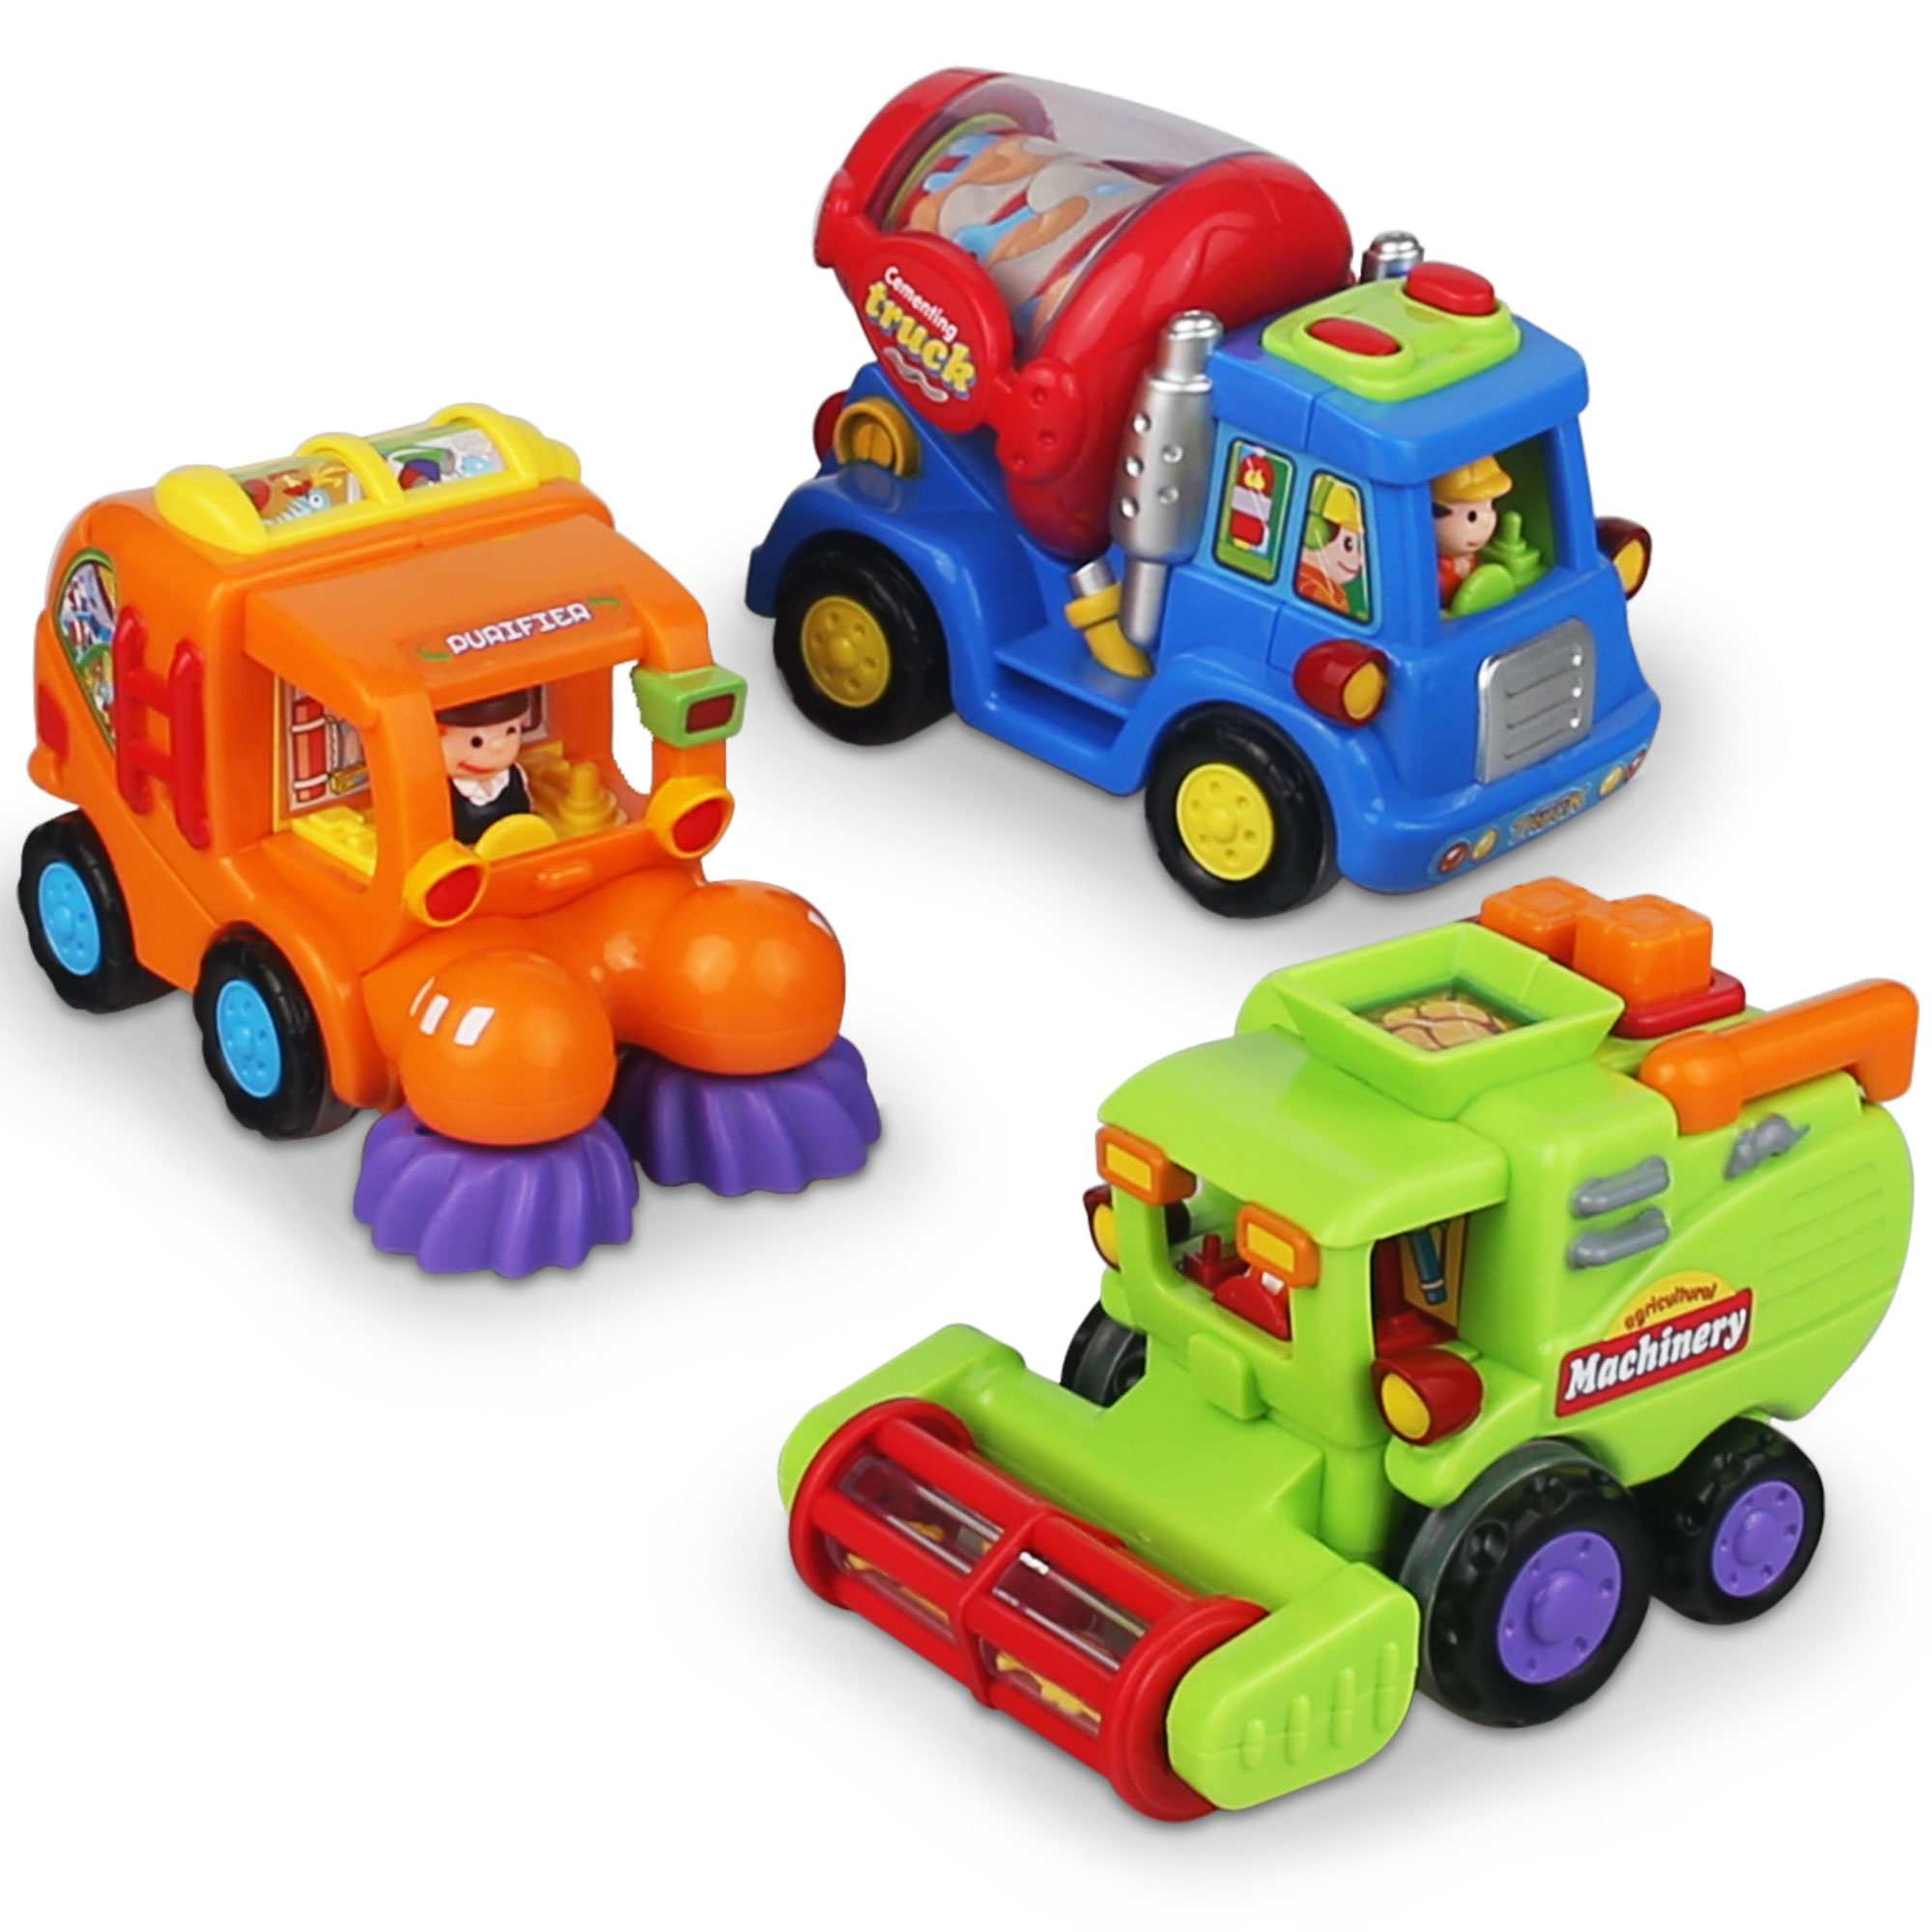 CifToys Friction Powered Push and Go Toddler Construction Toys Truck Vehicle Playset, Toys for 1 2 3 Year Old Boy Toys Gifts (3 Pieces) - image 1 of 10